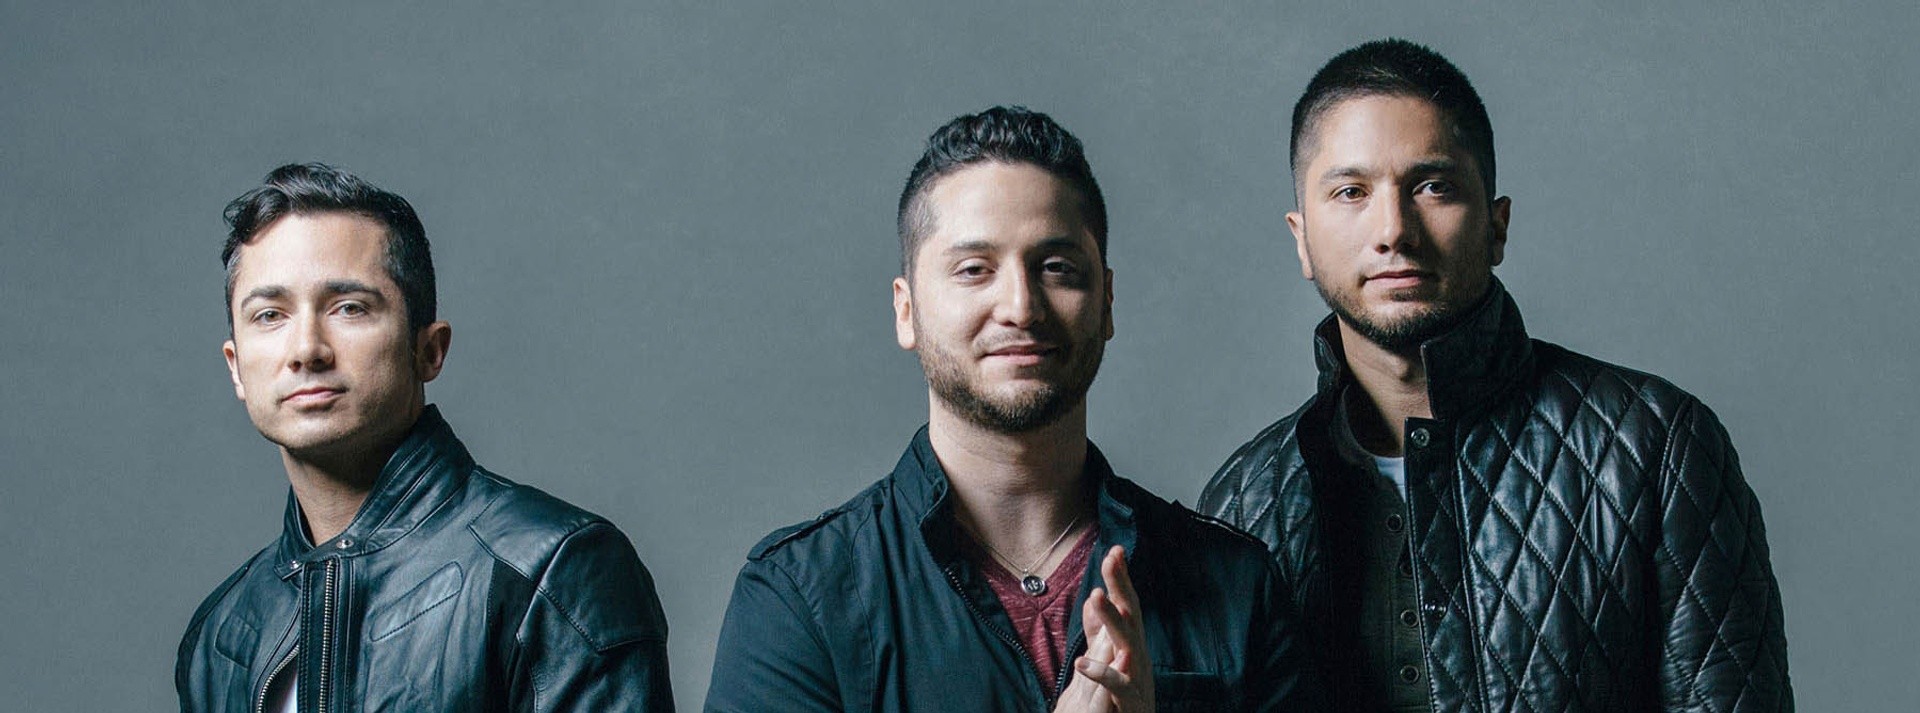 Ticketing details for ChillFest @ The Green featuring Boyce Avenue, Charlie Lim, John Allred and more announced 